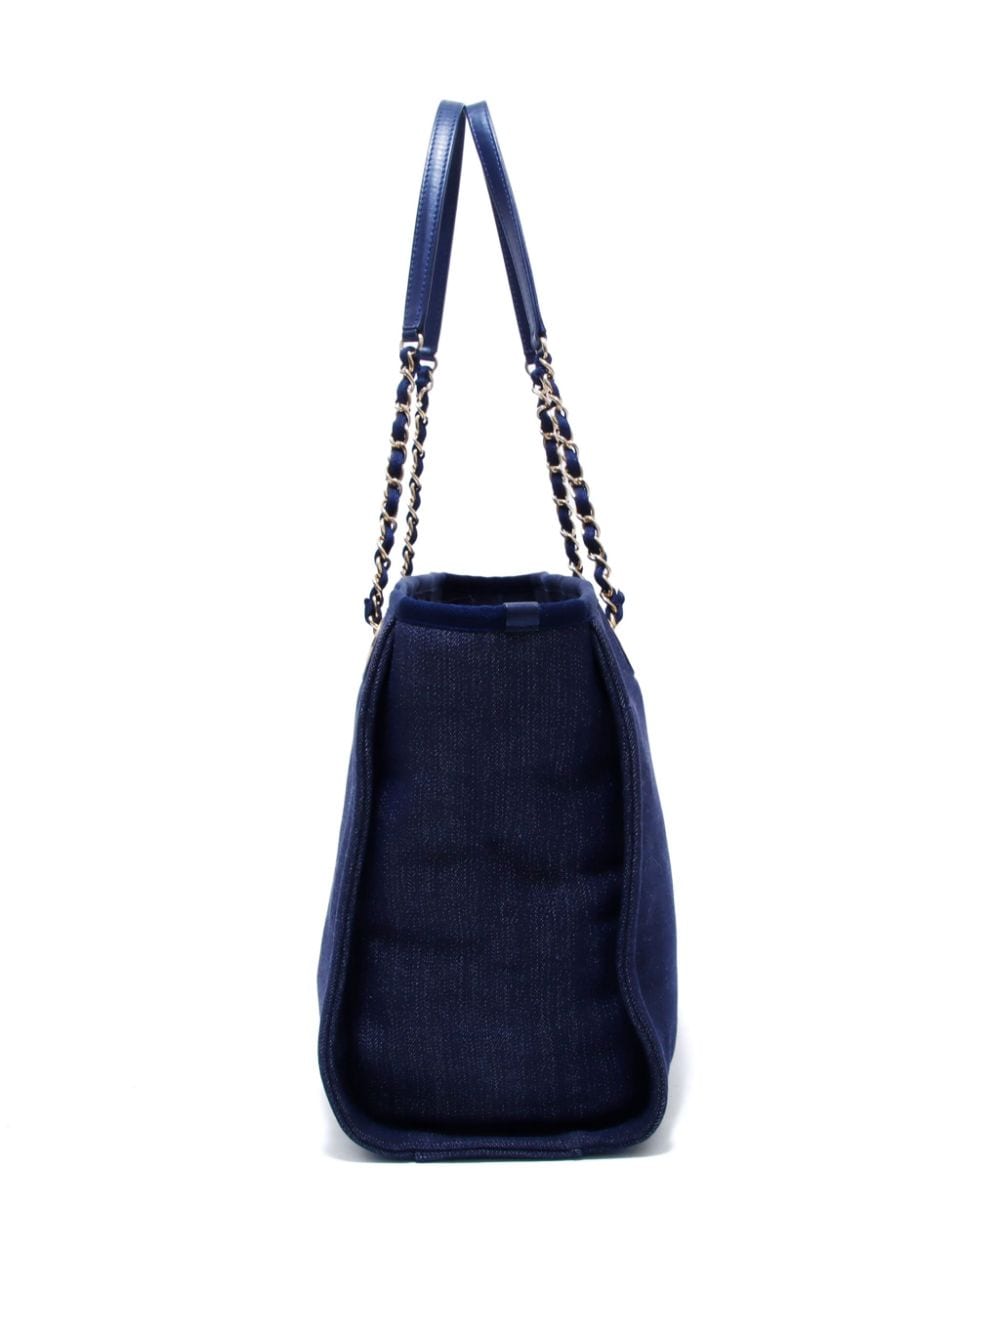 Pre-owned Chanel 2013-2014 Denim Line Tote Bag In Blue